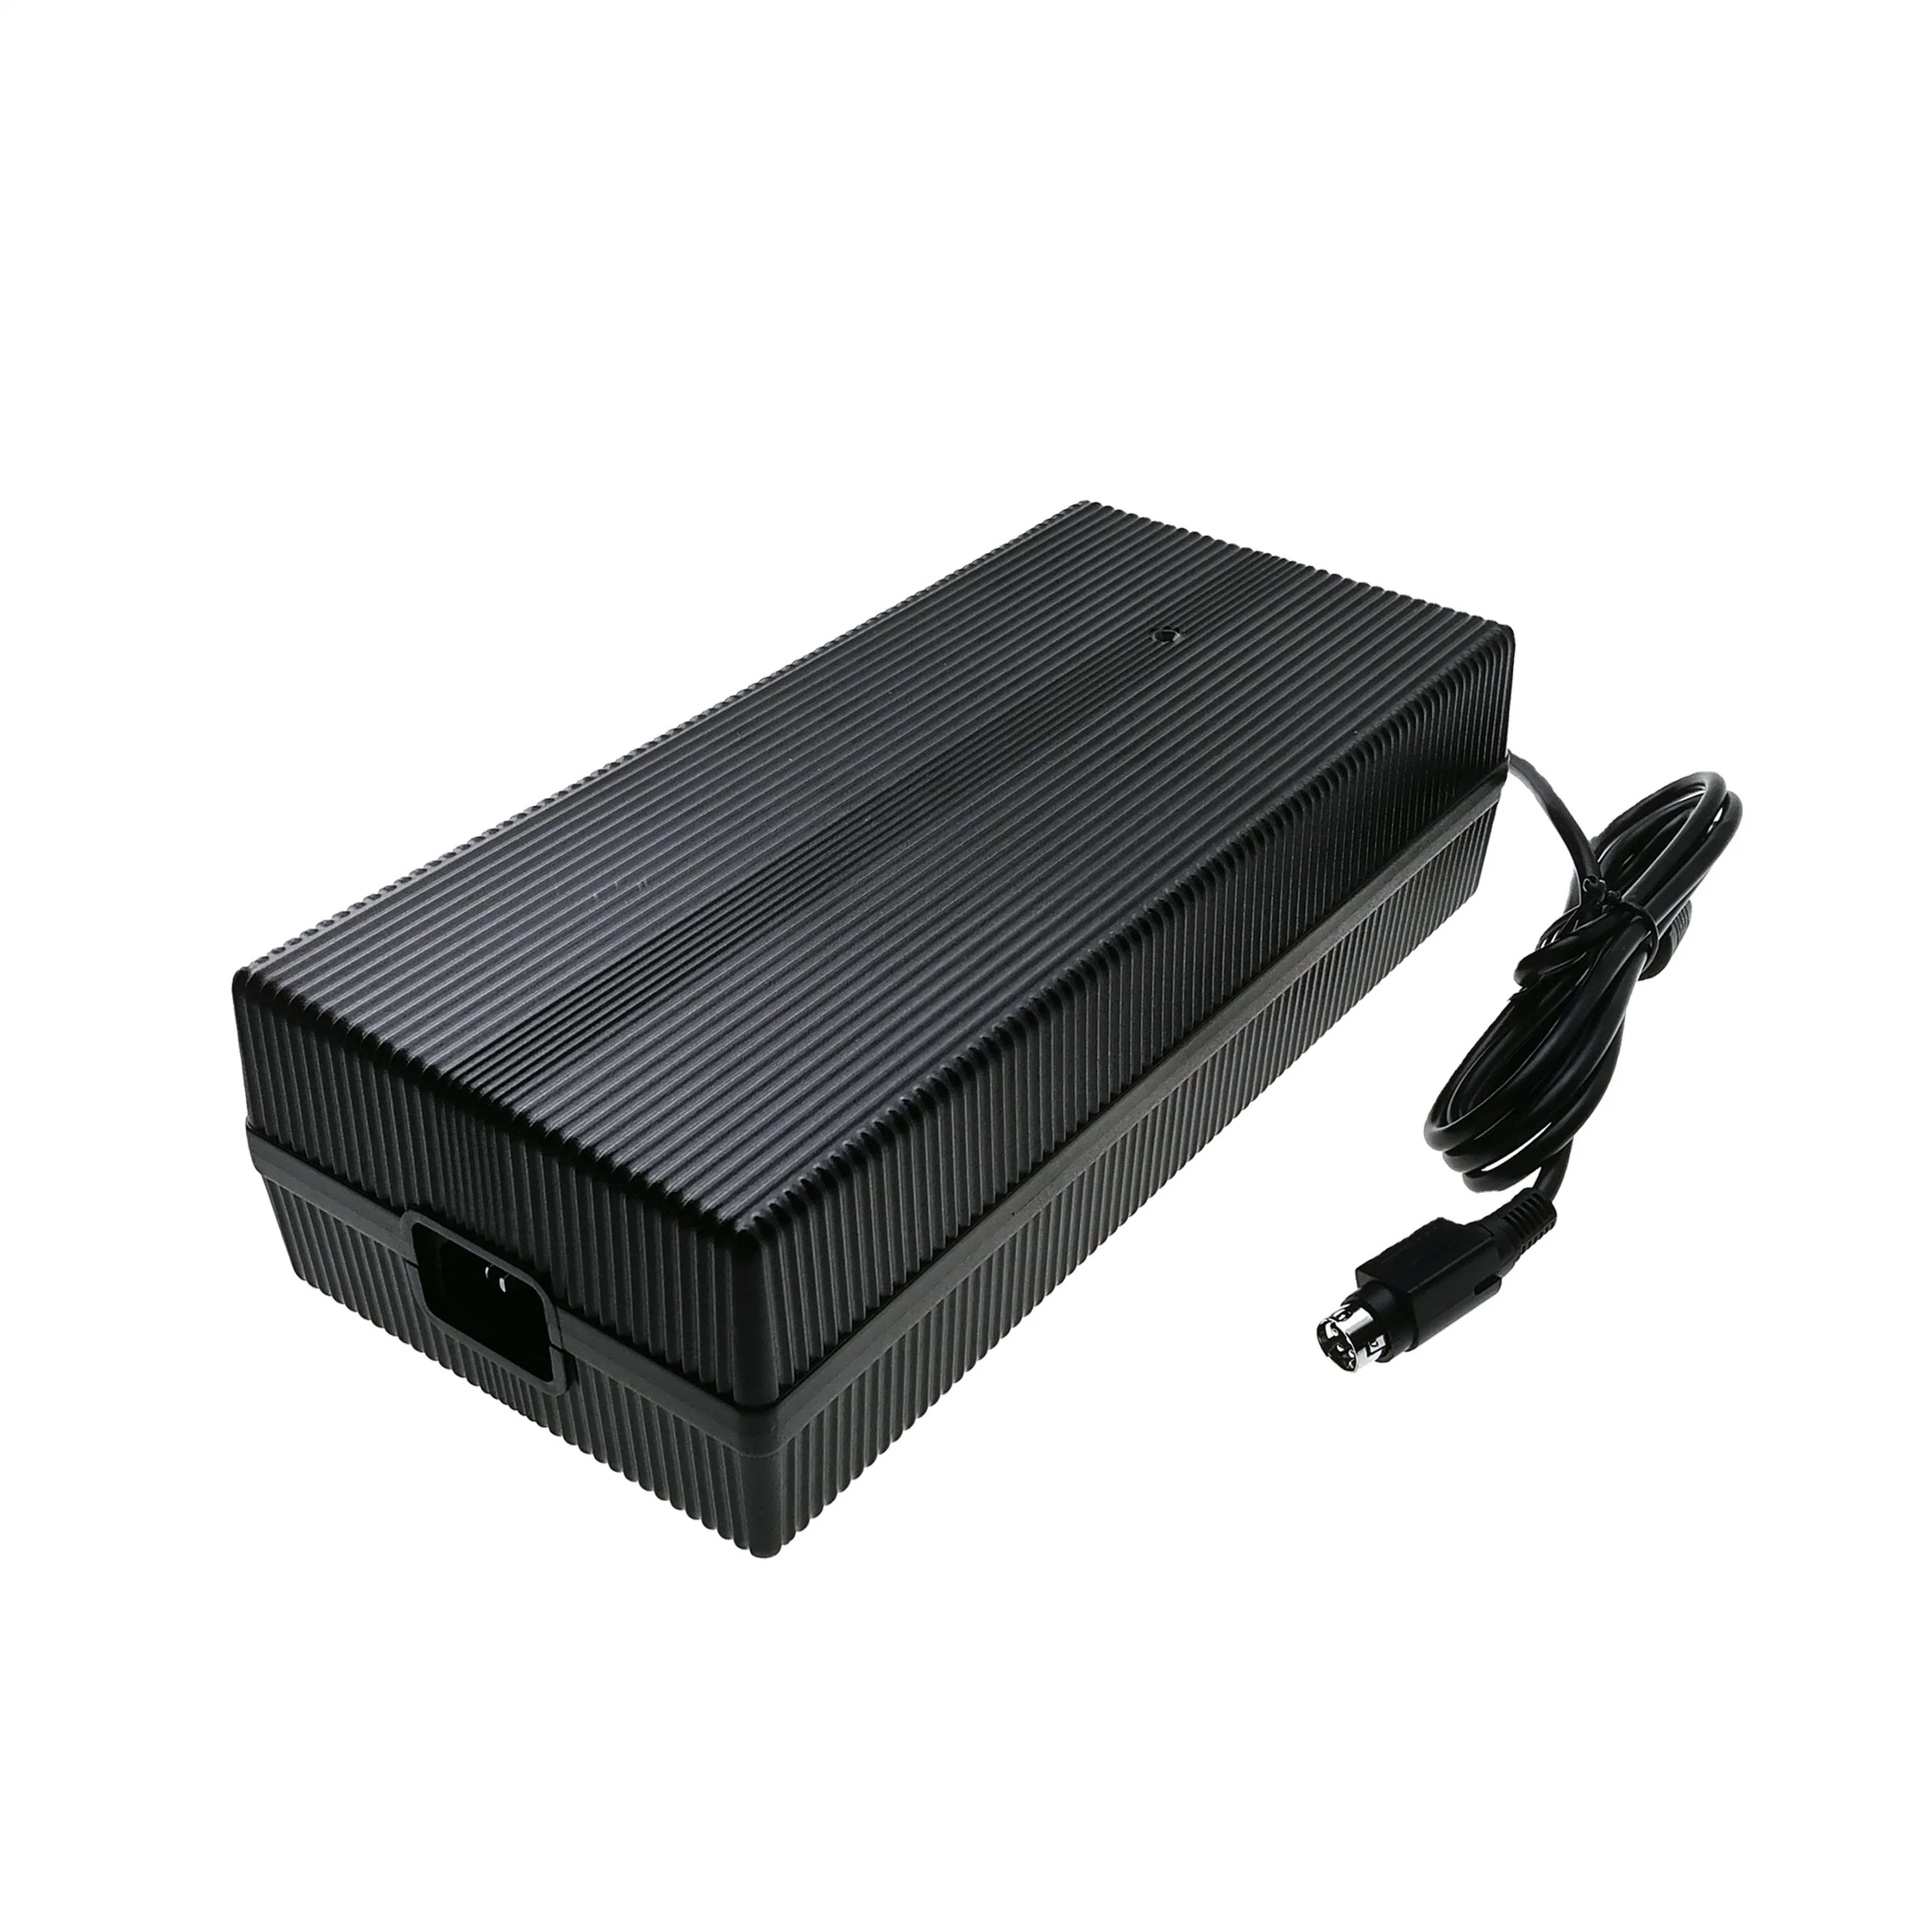 12V 12.6V 3s 250W 11A Lithium Battery Charger